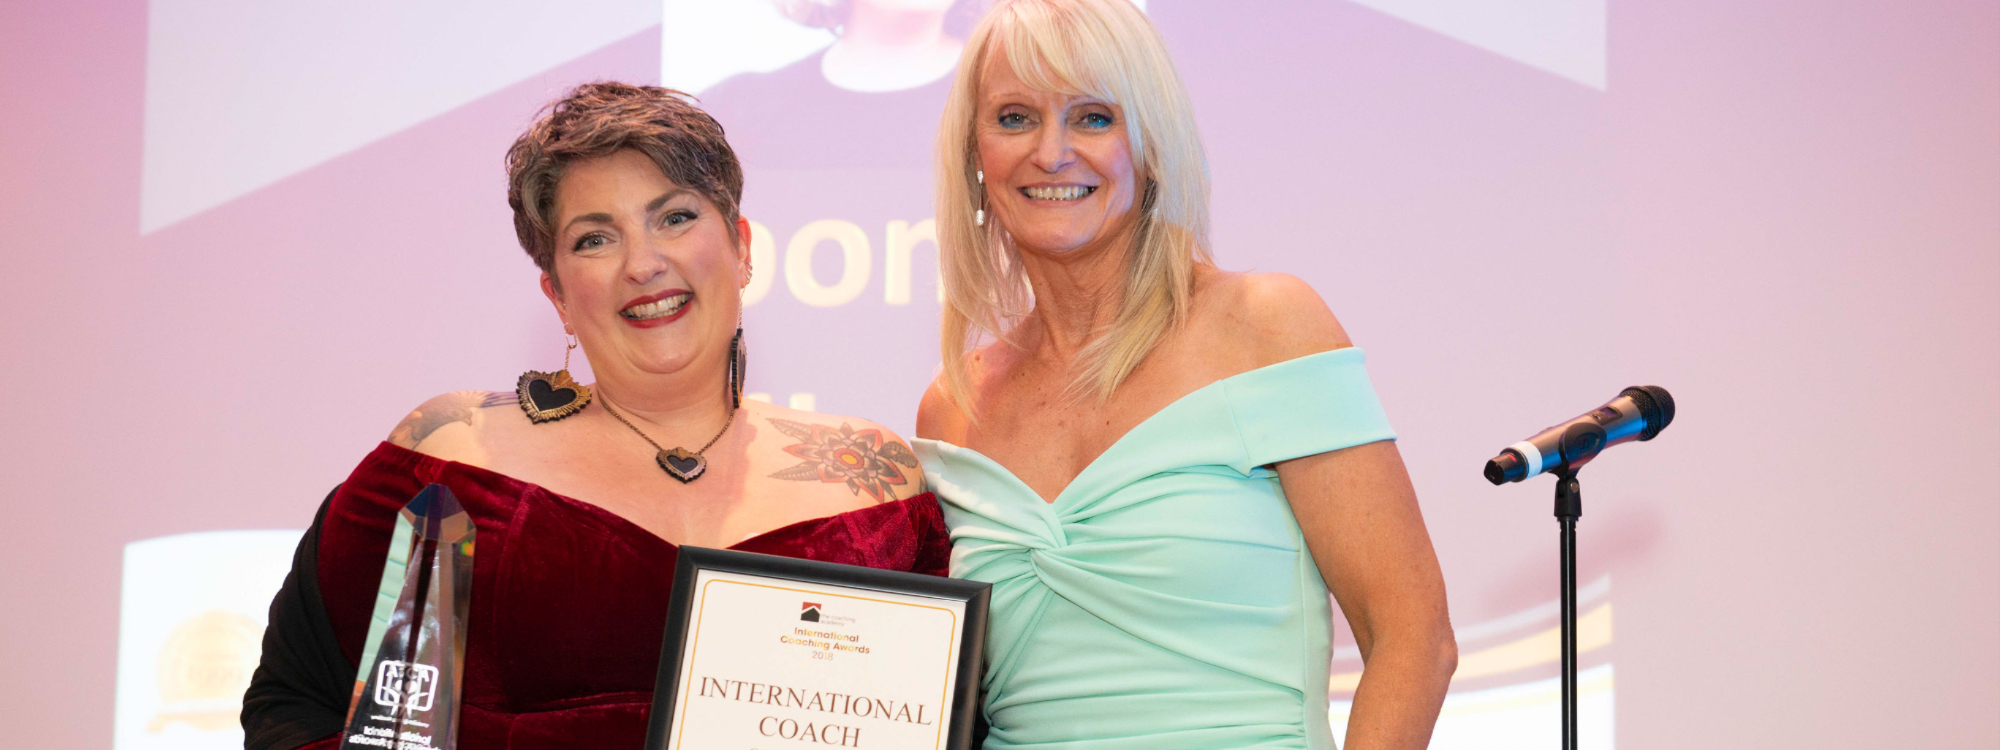 Ebonie Allard - 'It was so lovely to be recognised and valued for my work' 